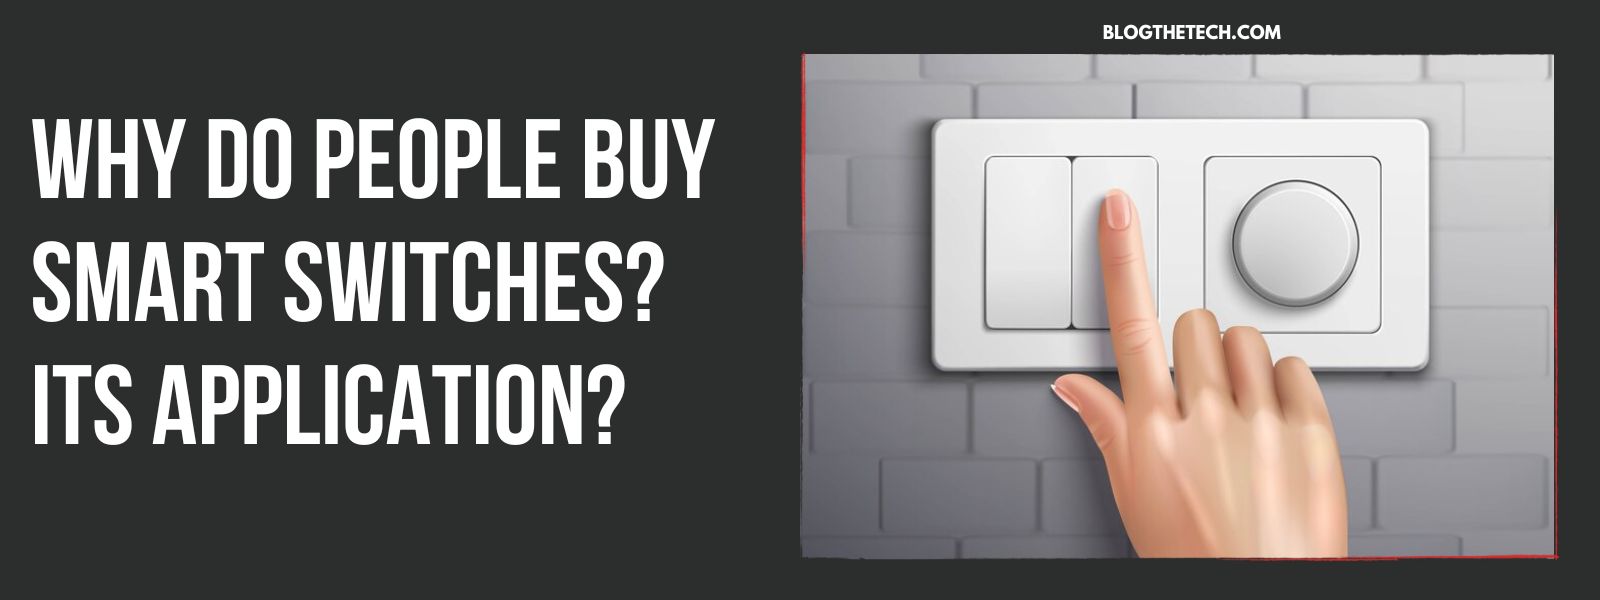 Why do people buy smart switches? Its application?